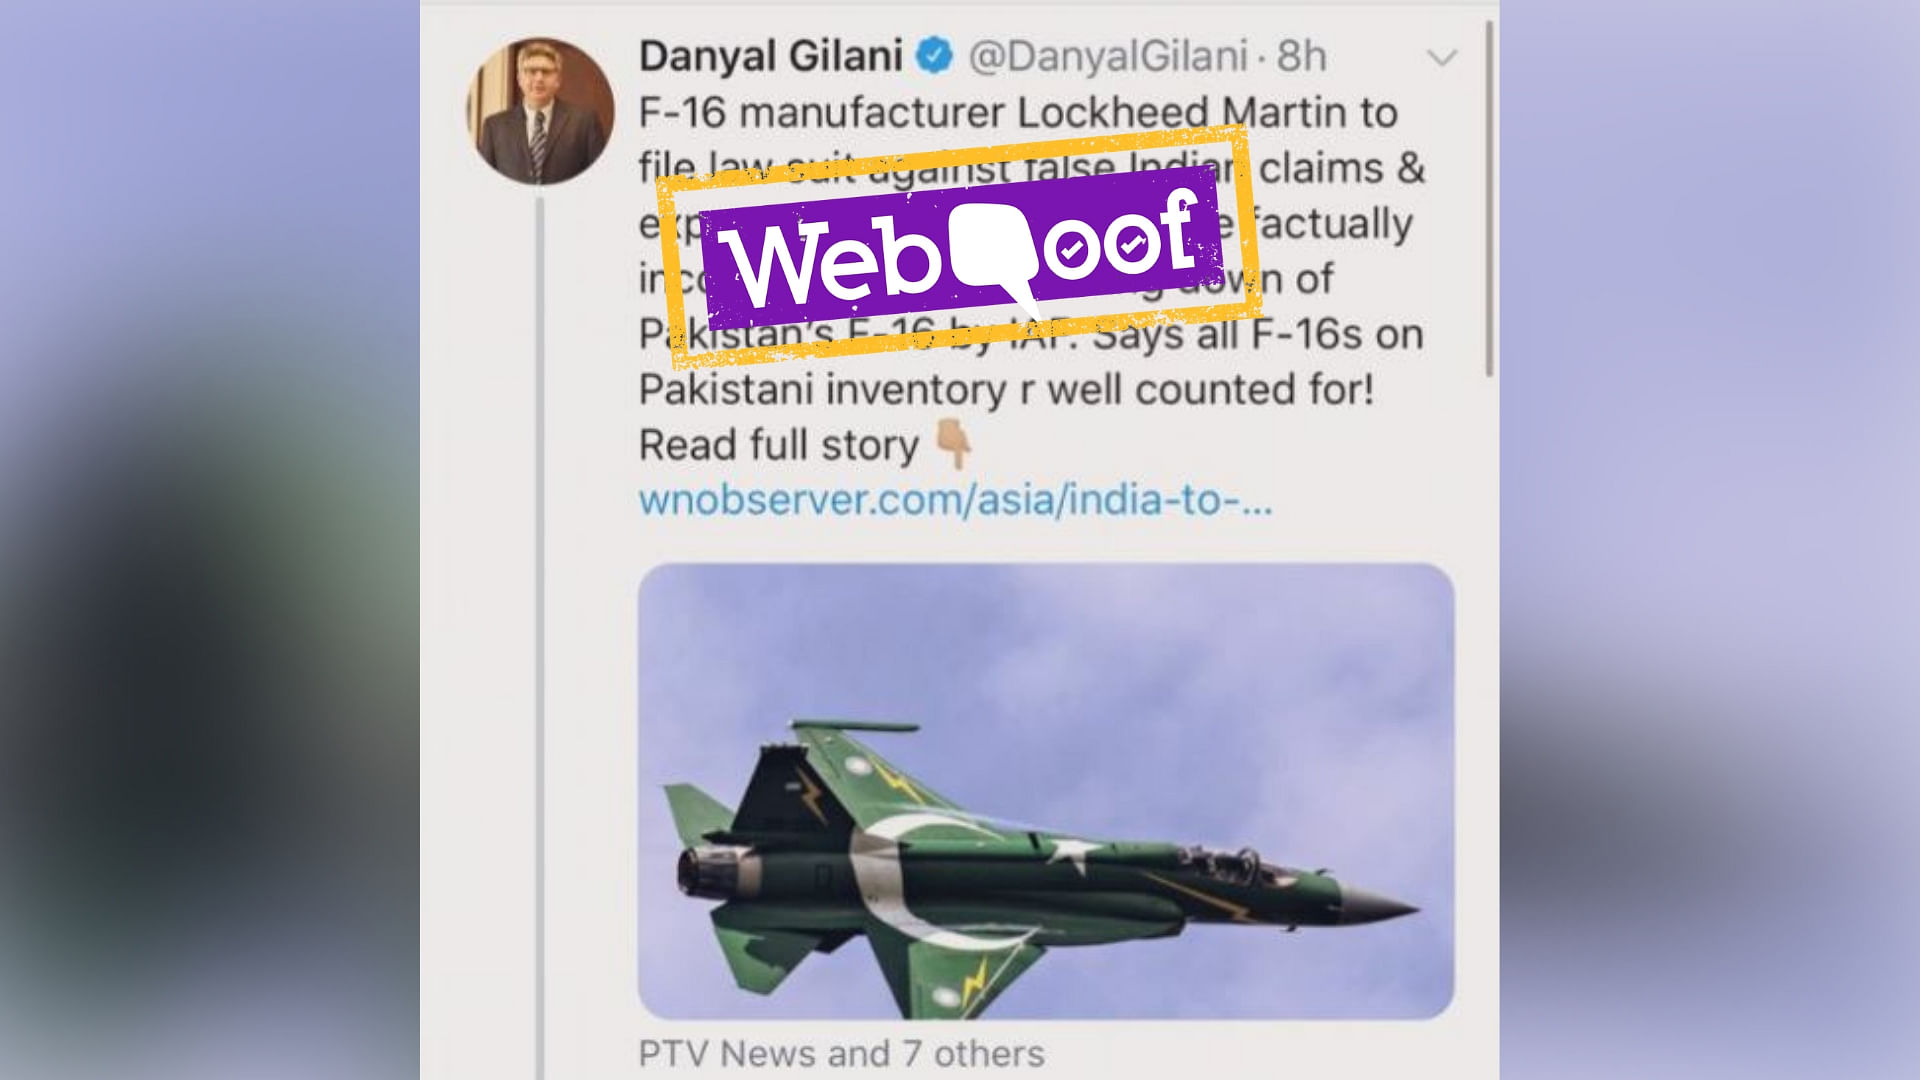 Lockheed Martin India’s Twitter handle called out Gilani’s tweet as false, stating it had never made such comments.